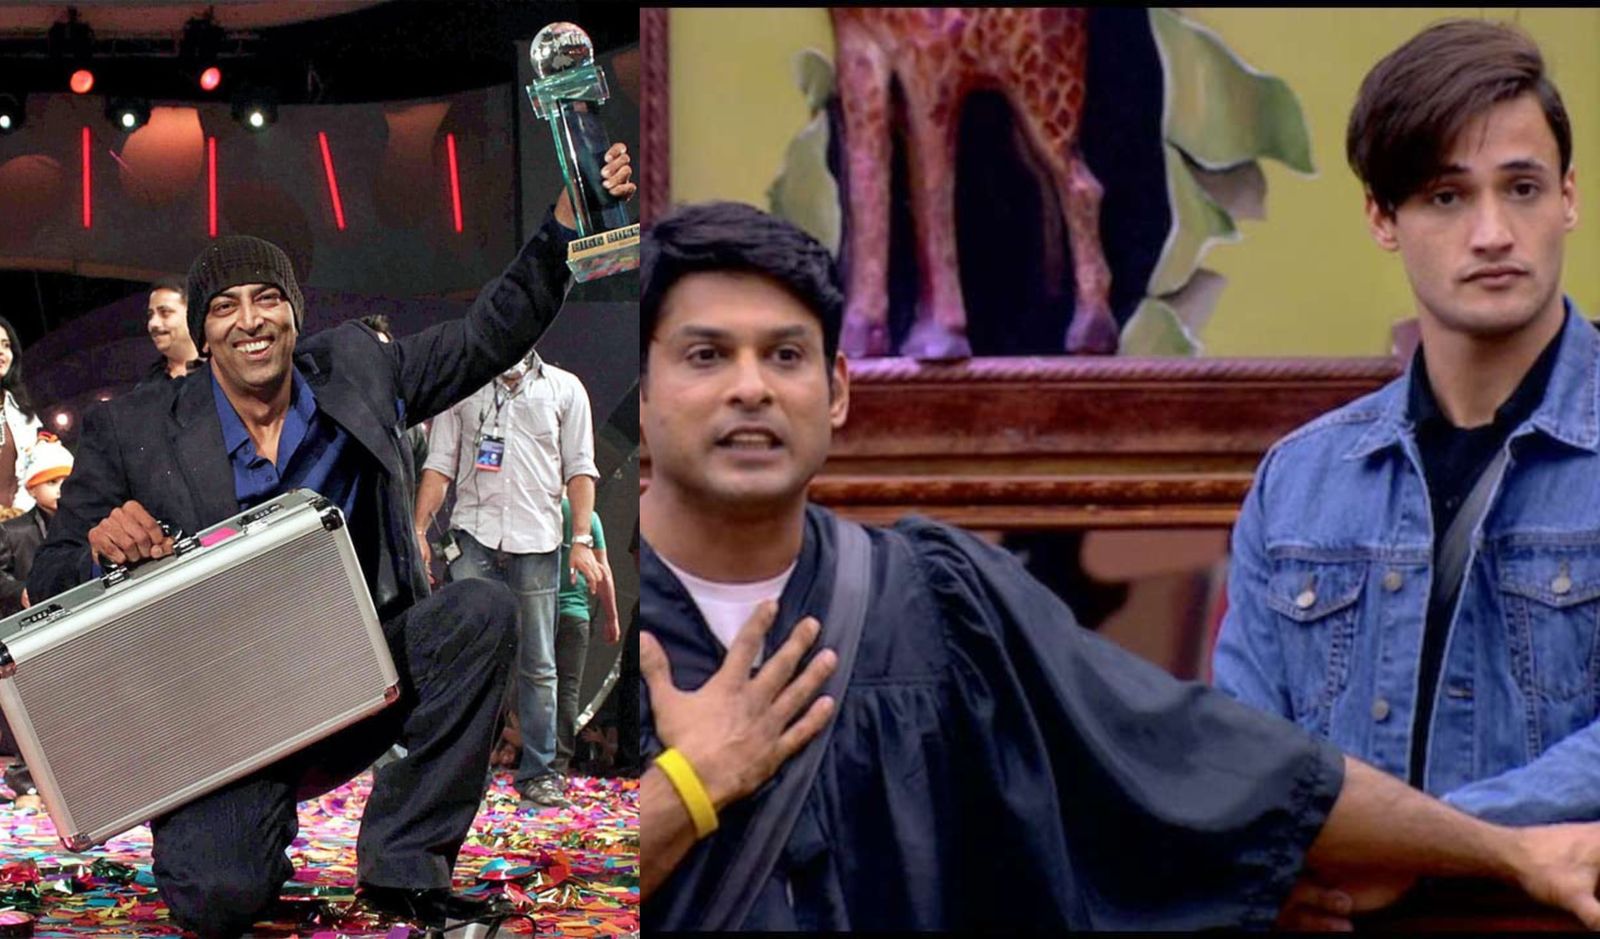 Bigg Boss 13: Ardent Siddharth Shukla Supporter Vindu Dara Singh To Enter The House, Does Asim Riaz Need To Worry?